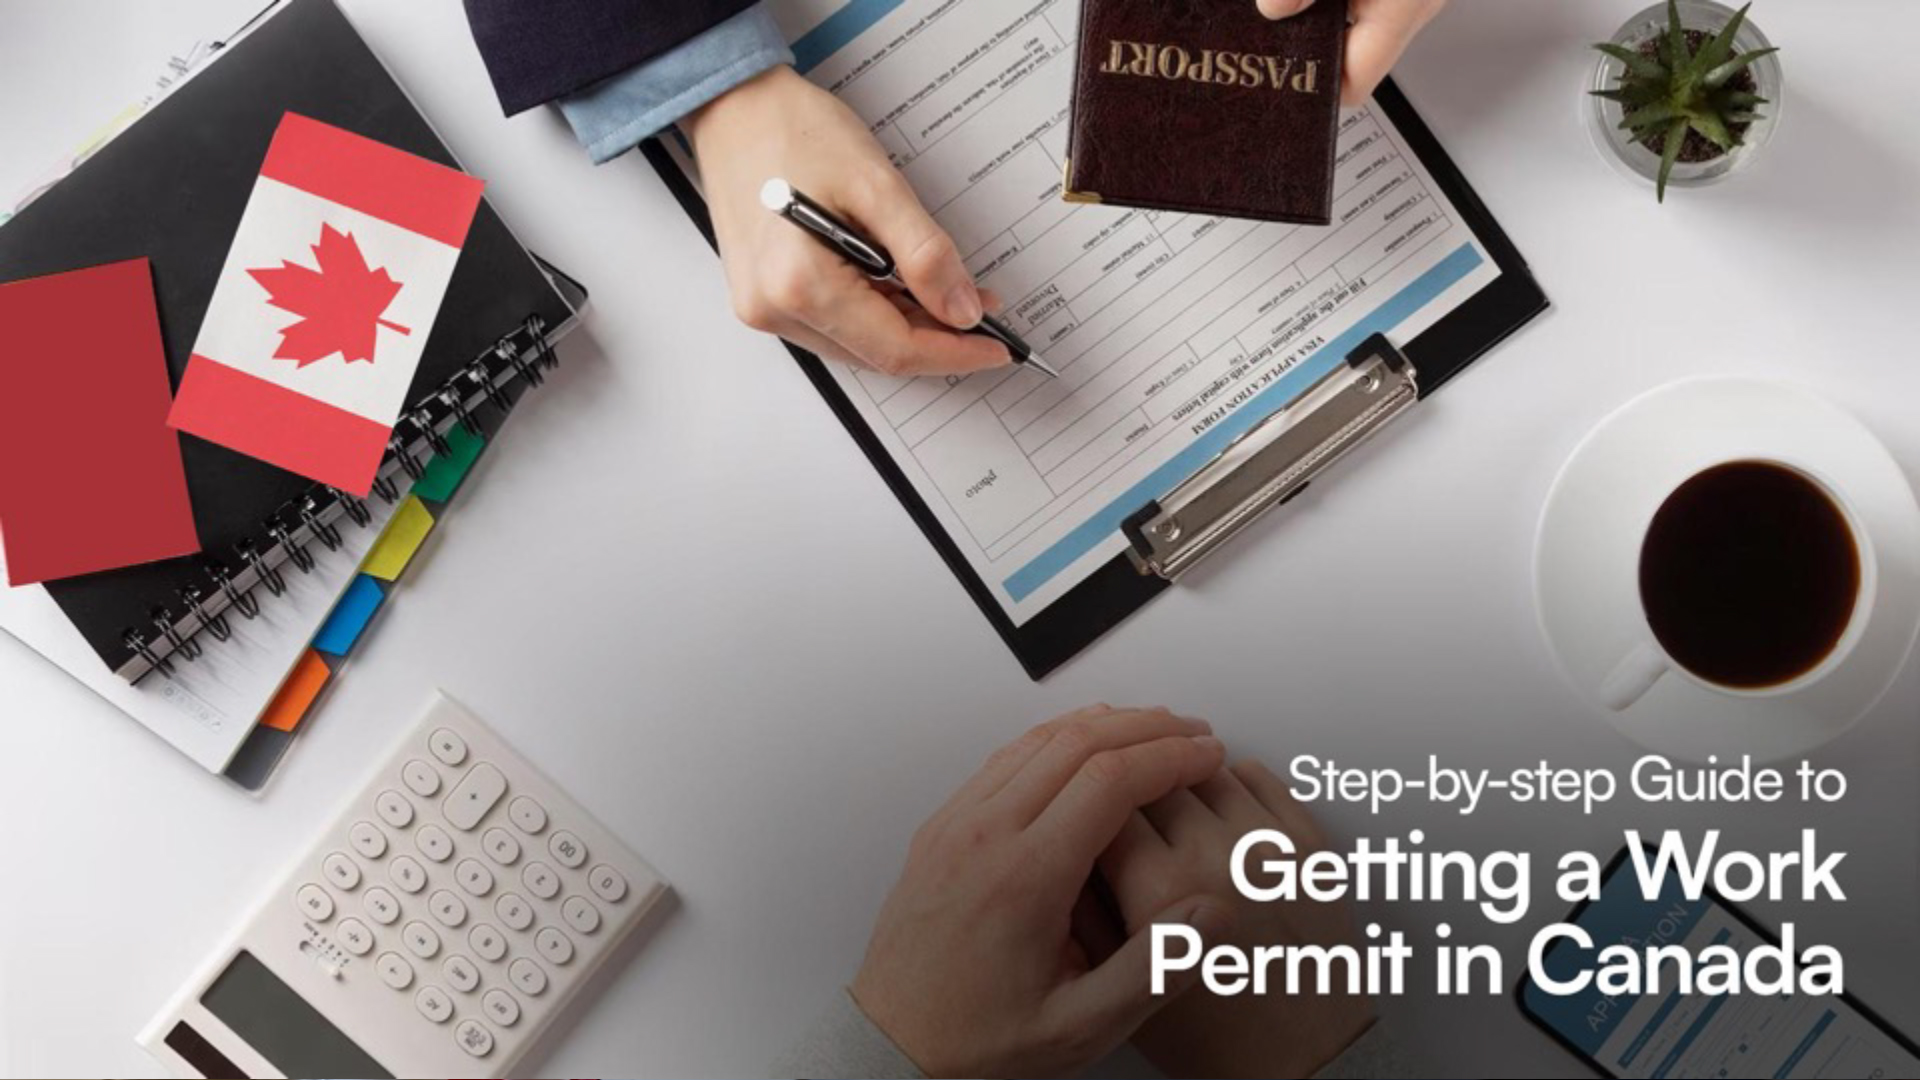 Banner - Step-by-step Guide to Getting a Work Permit in Canada 